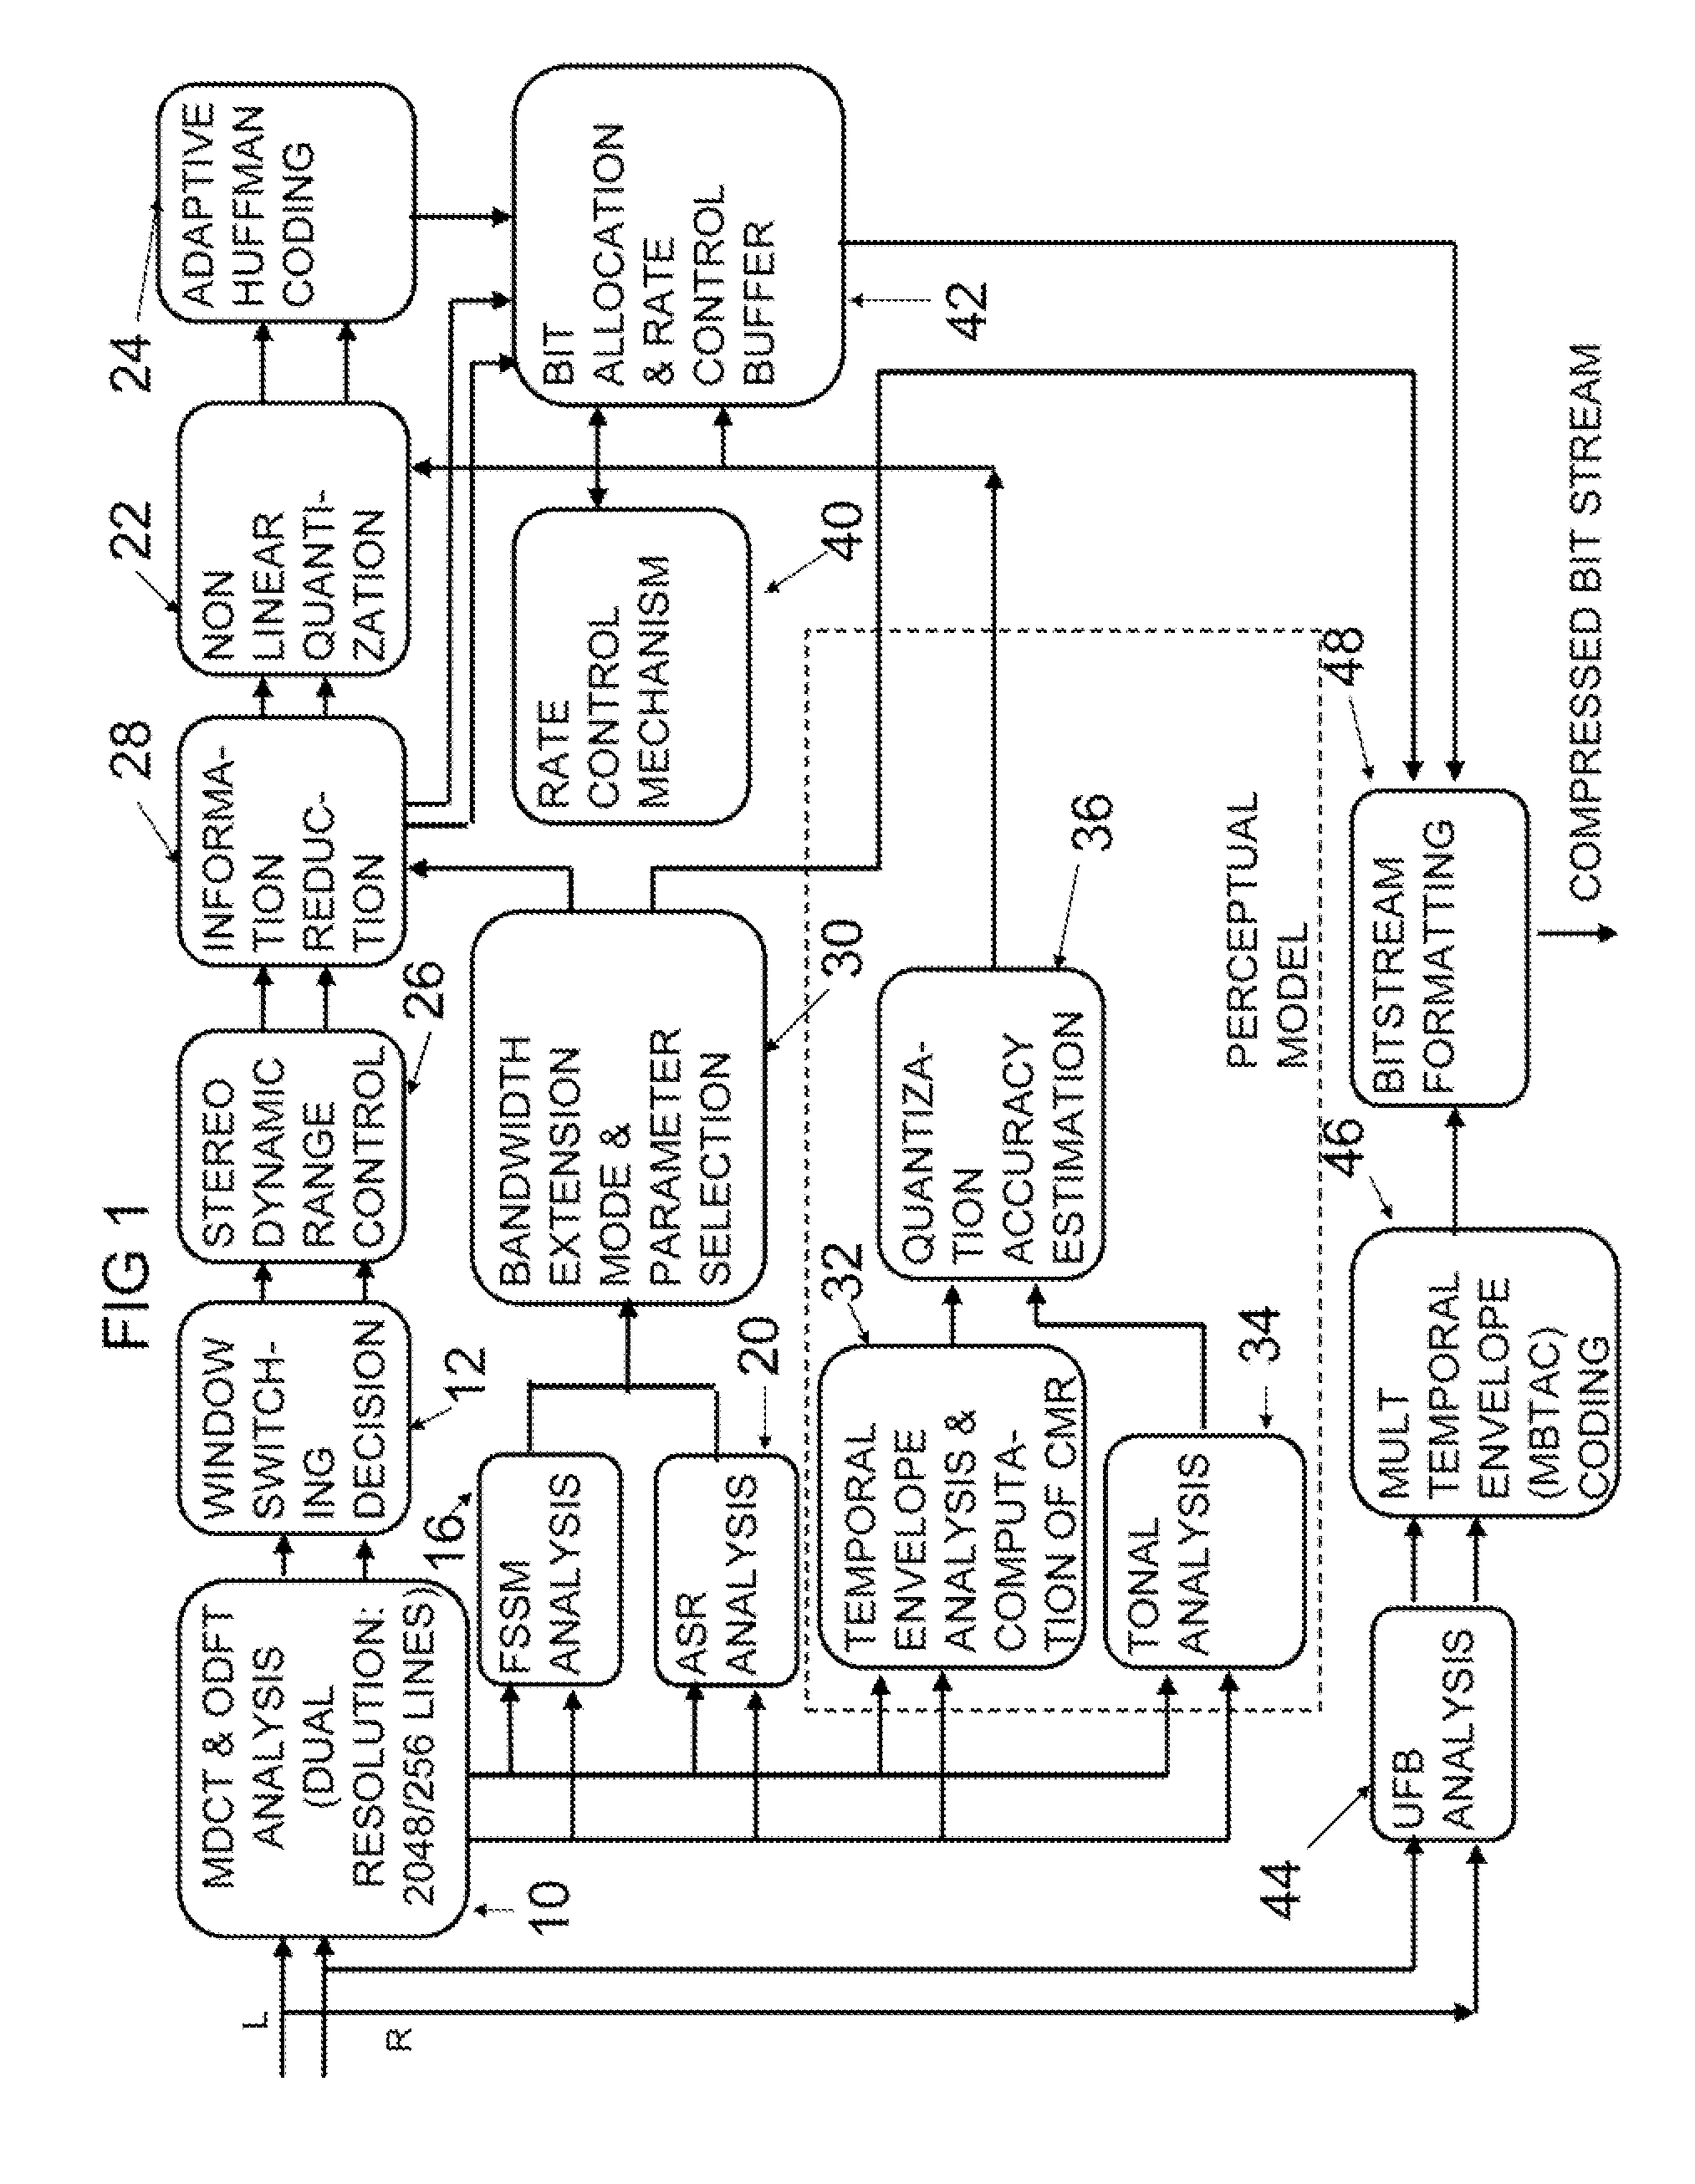 Method and apparatus for audio encoding and decoding using wideband psychoacoustic modeling and bandwidth extension